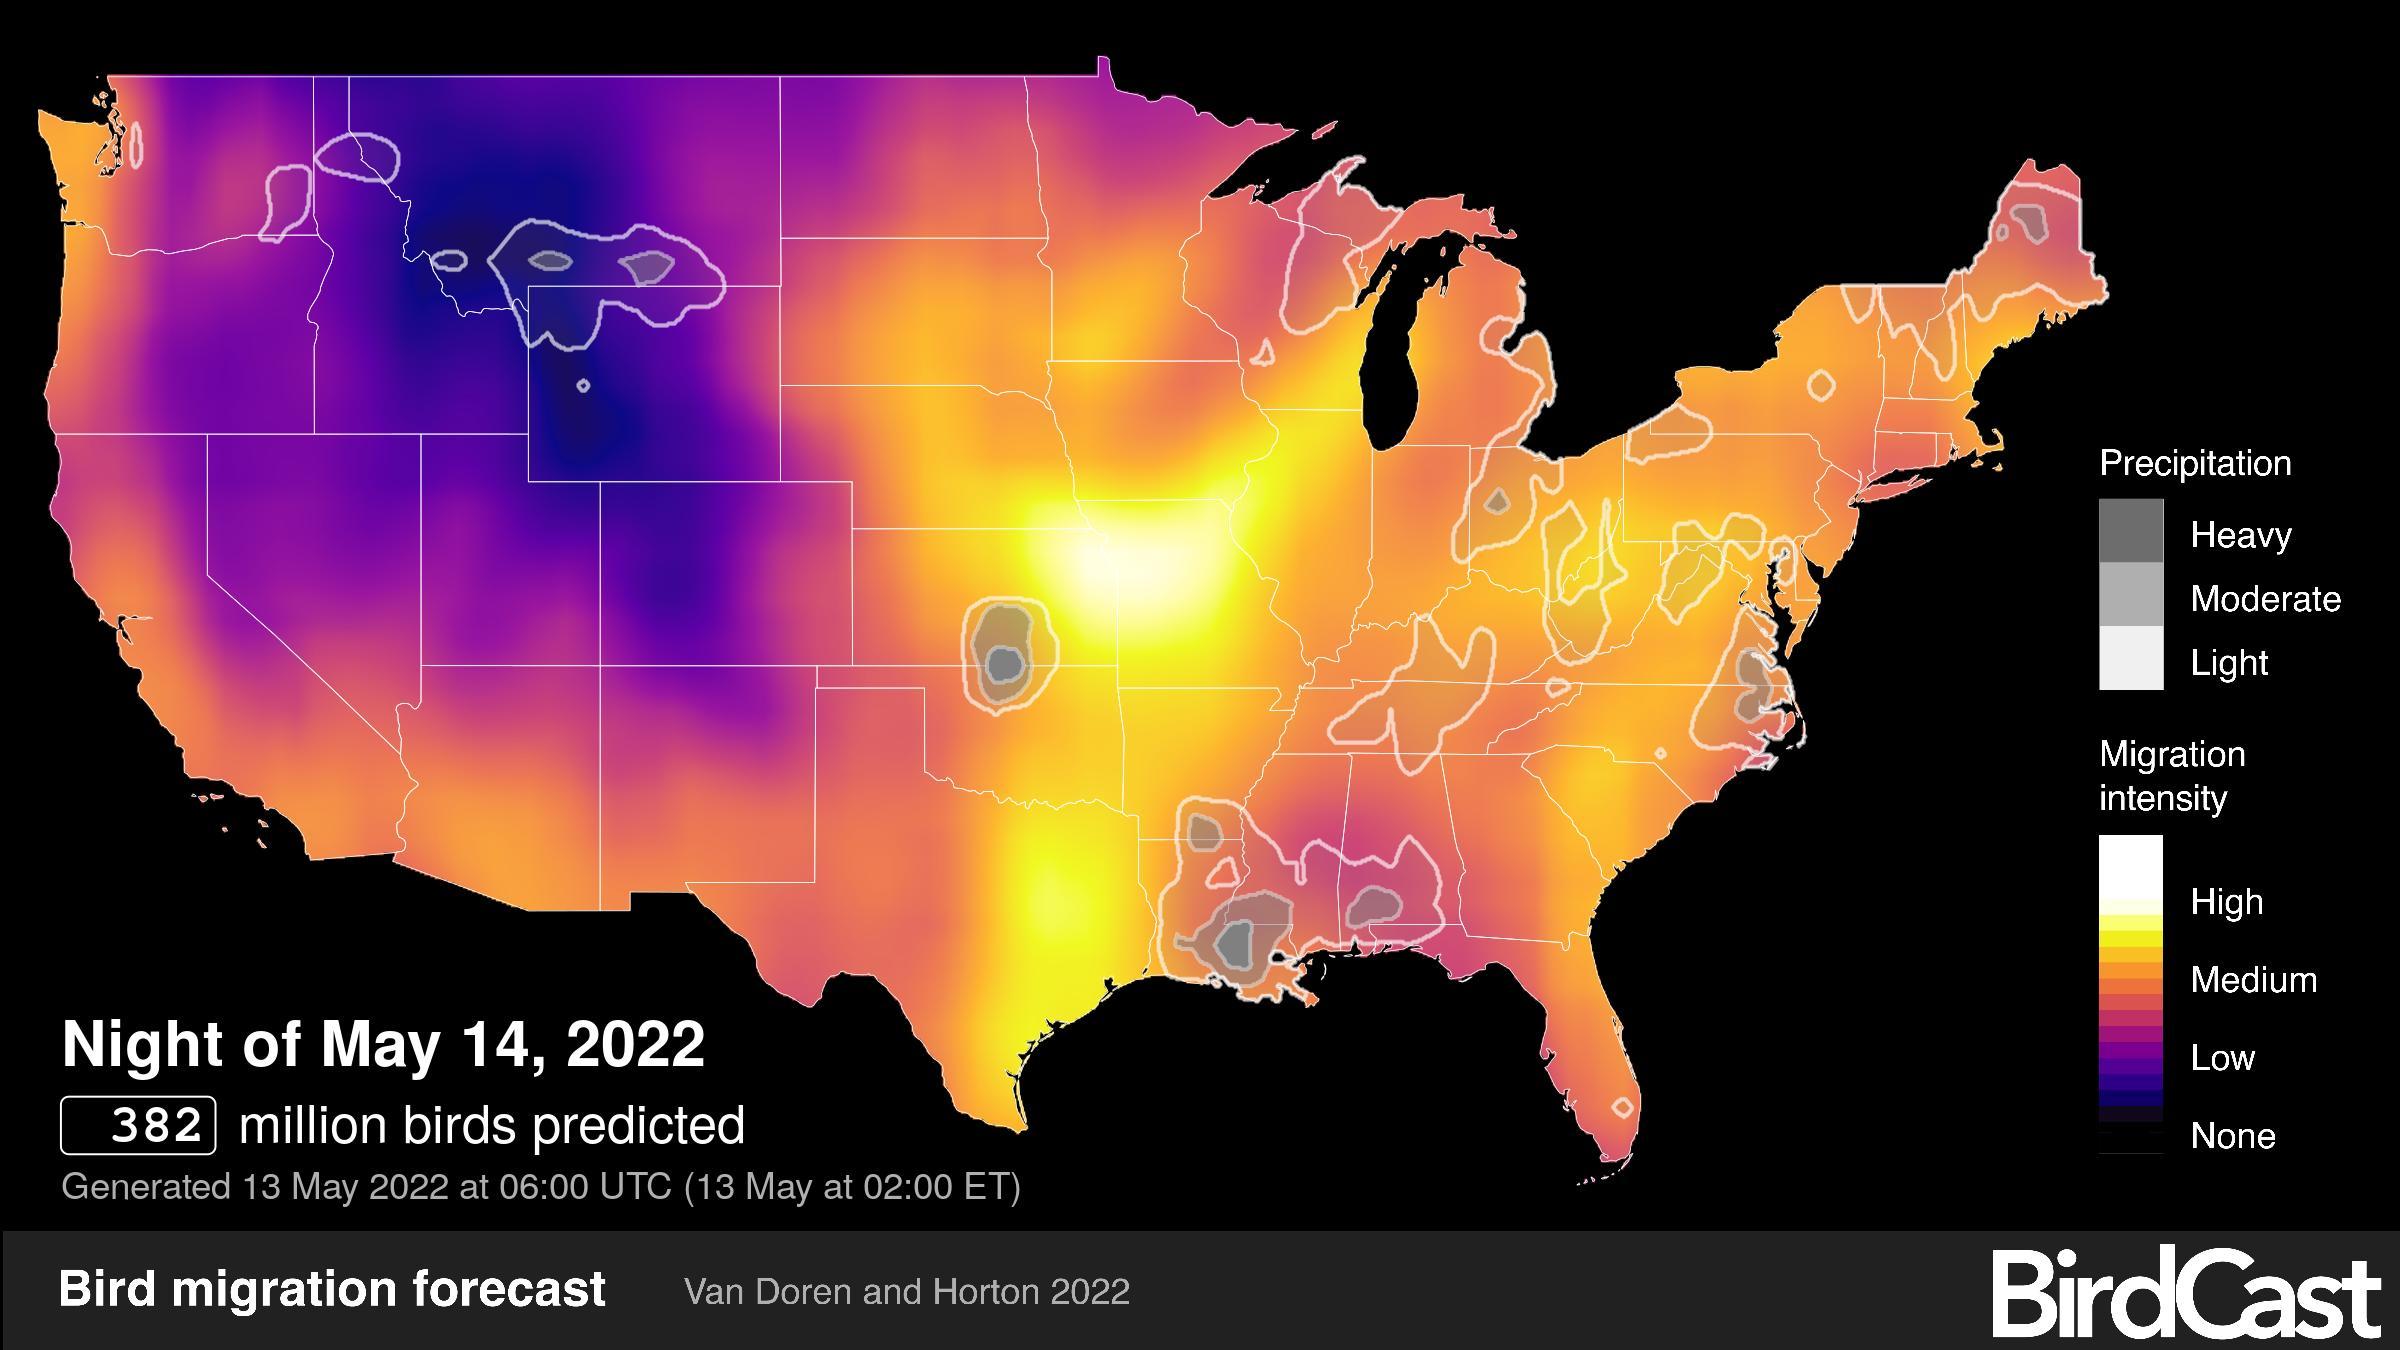 (Van Doren, B. M. and Horton, KG2022. BirdCast, Migration Prediction Map. Generated 5.13.2022 at Cornell University School of Birds and Colorado State University at 1:00 am. Birdcast.info/live-migration-maps. Download 5.13.2022 )